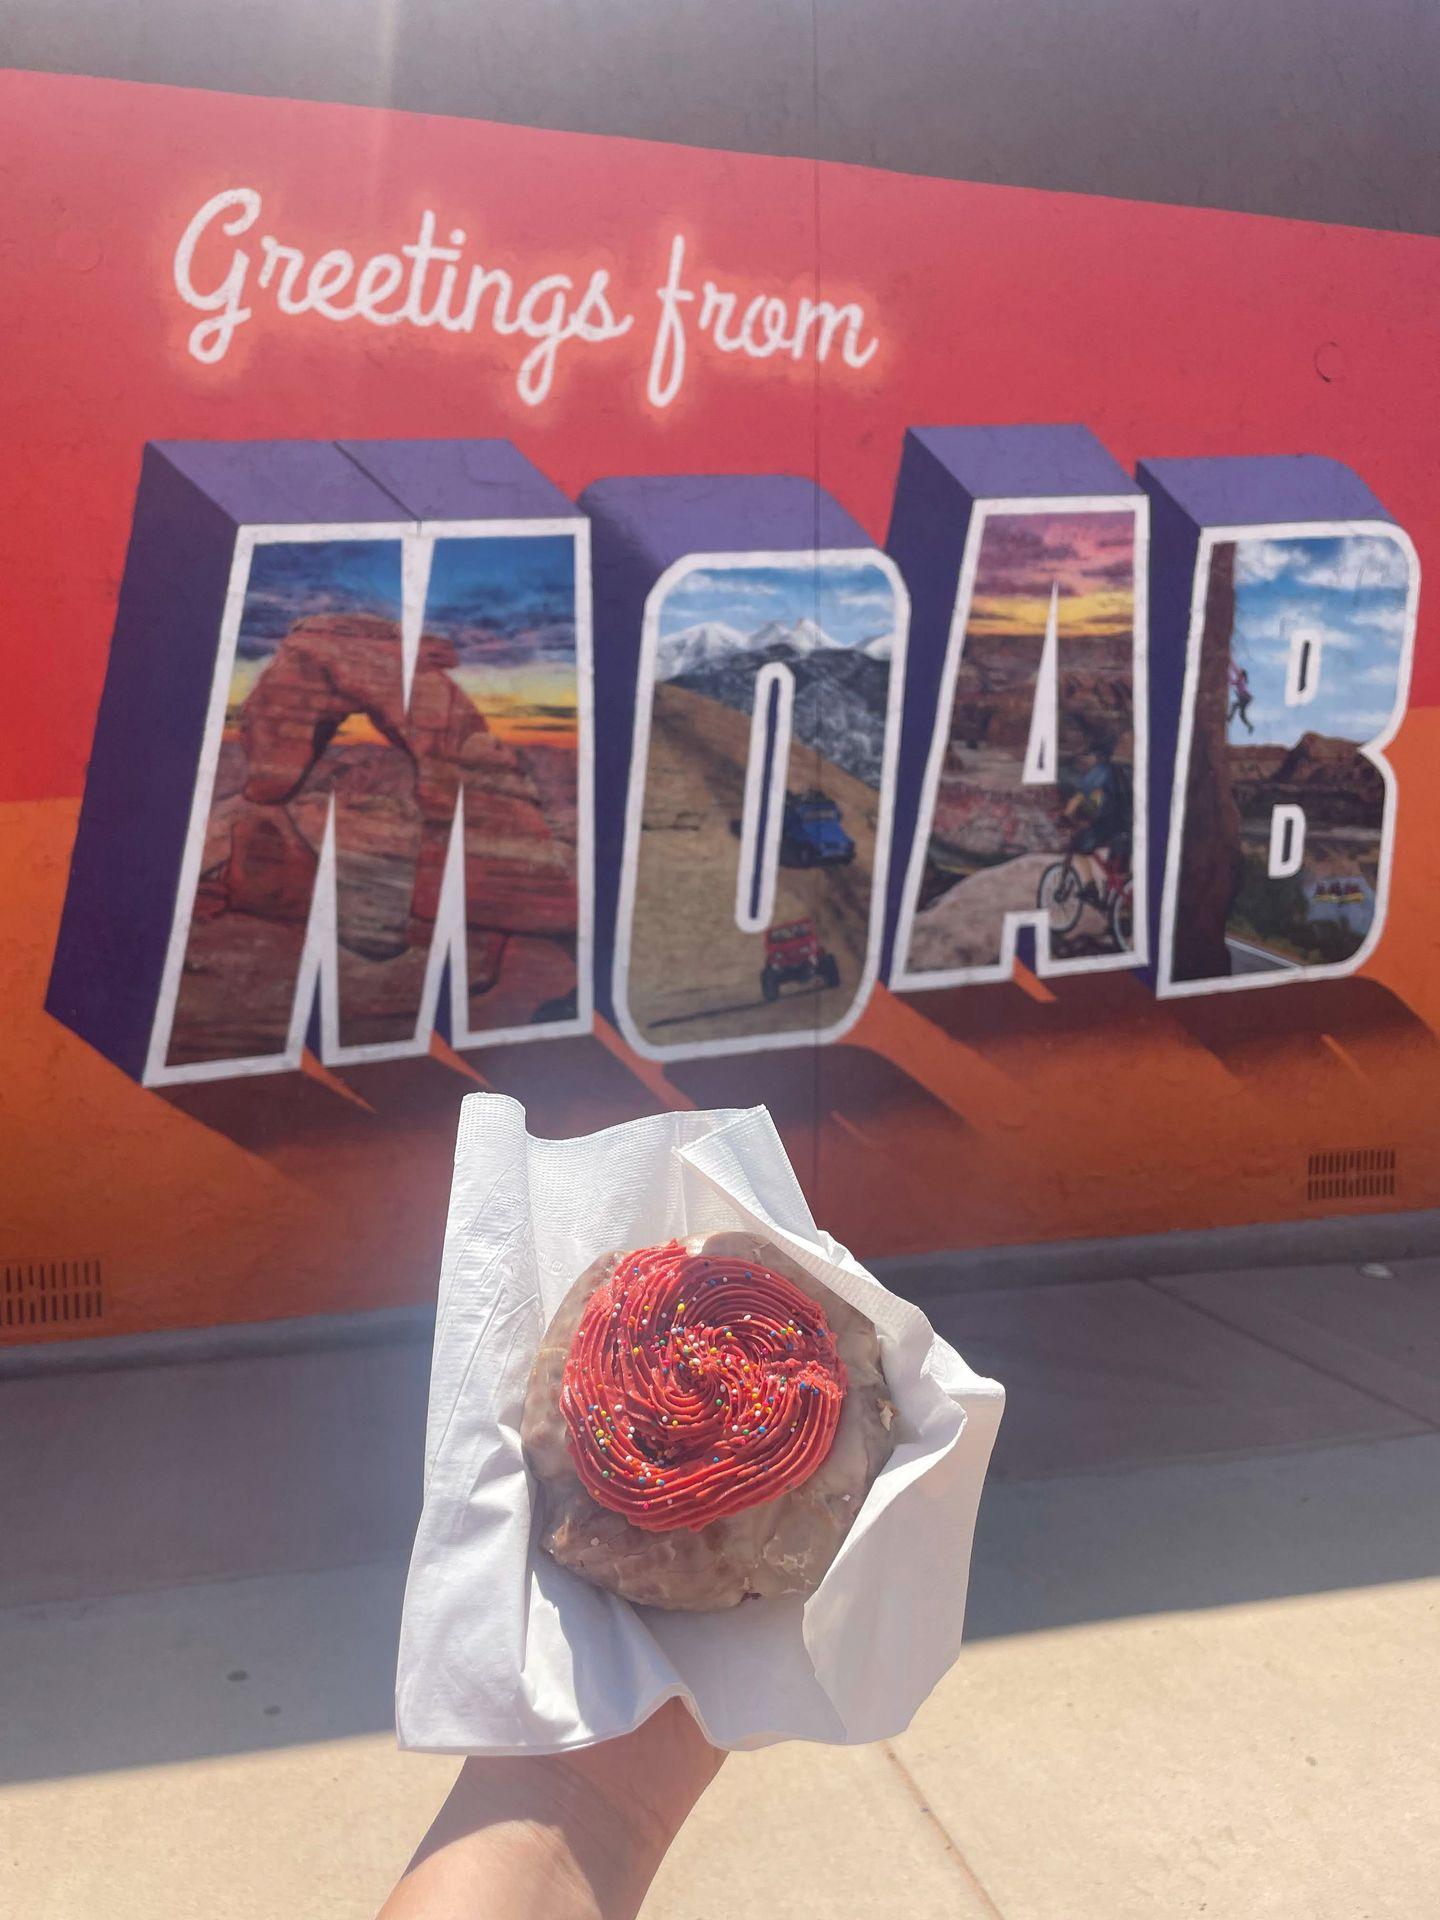 Holding up a donut with red icing in front of a "Greetings from Moab" mural